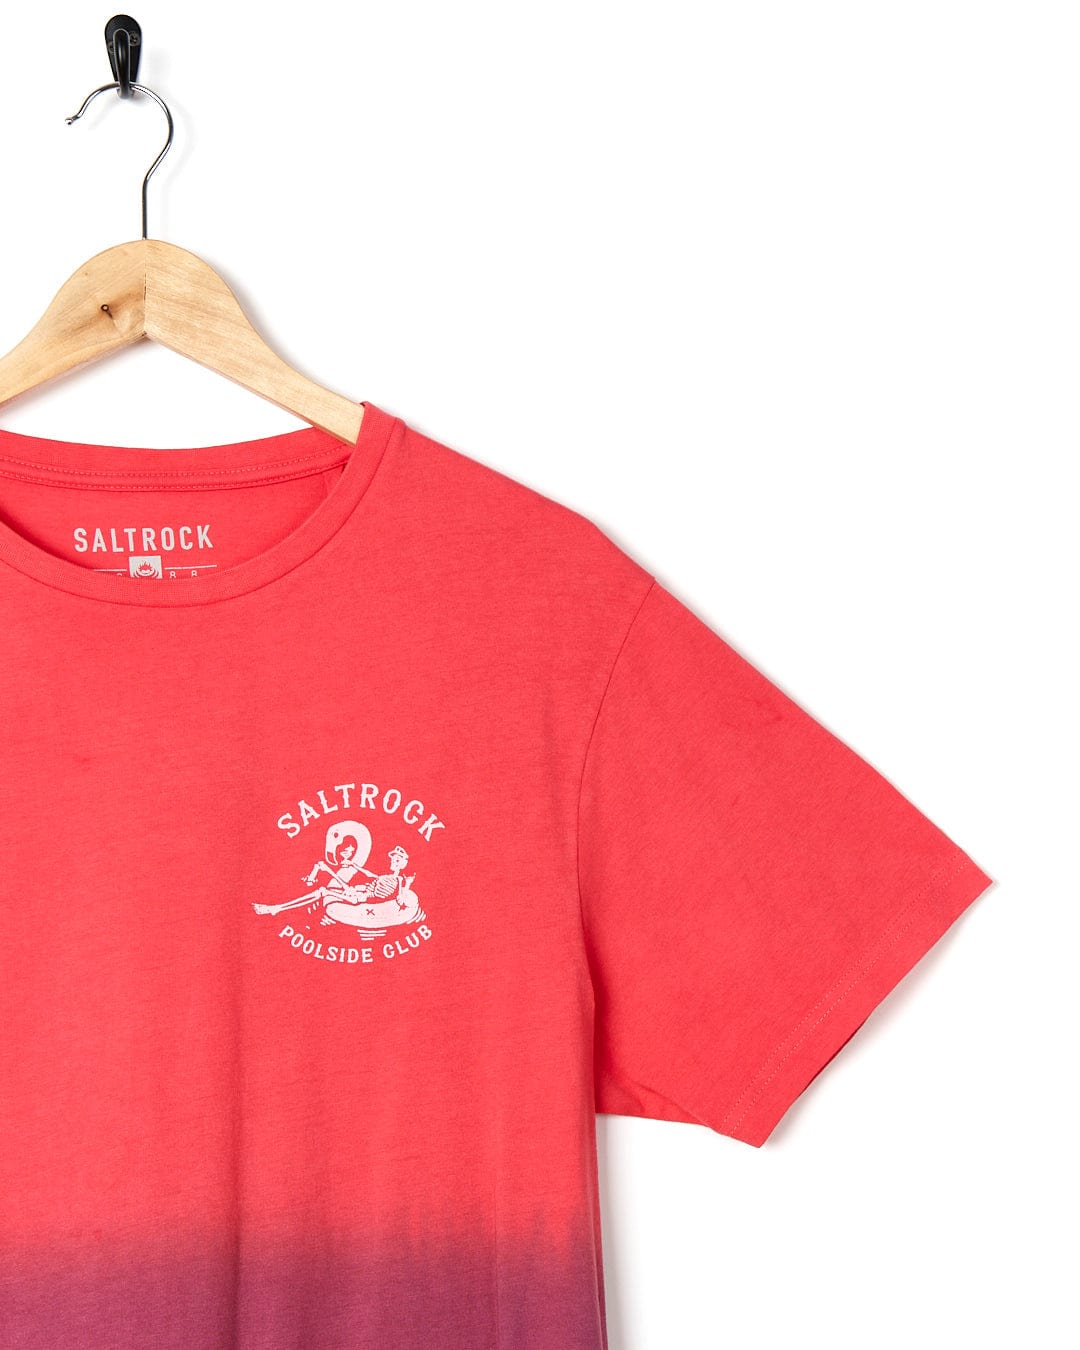 A Saltrock Poolside - Mens Dip Die Short Sleeve T-Shirt - Pink with an image of a surfboard on it.